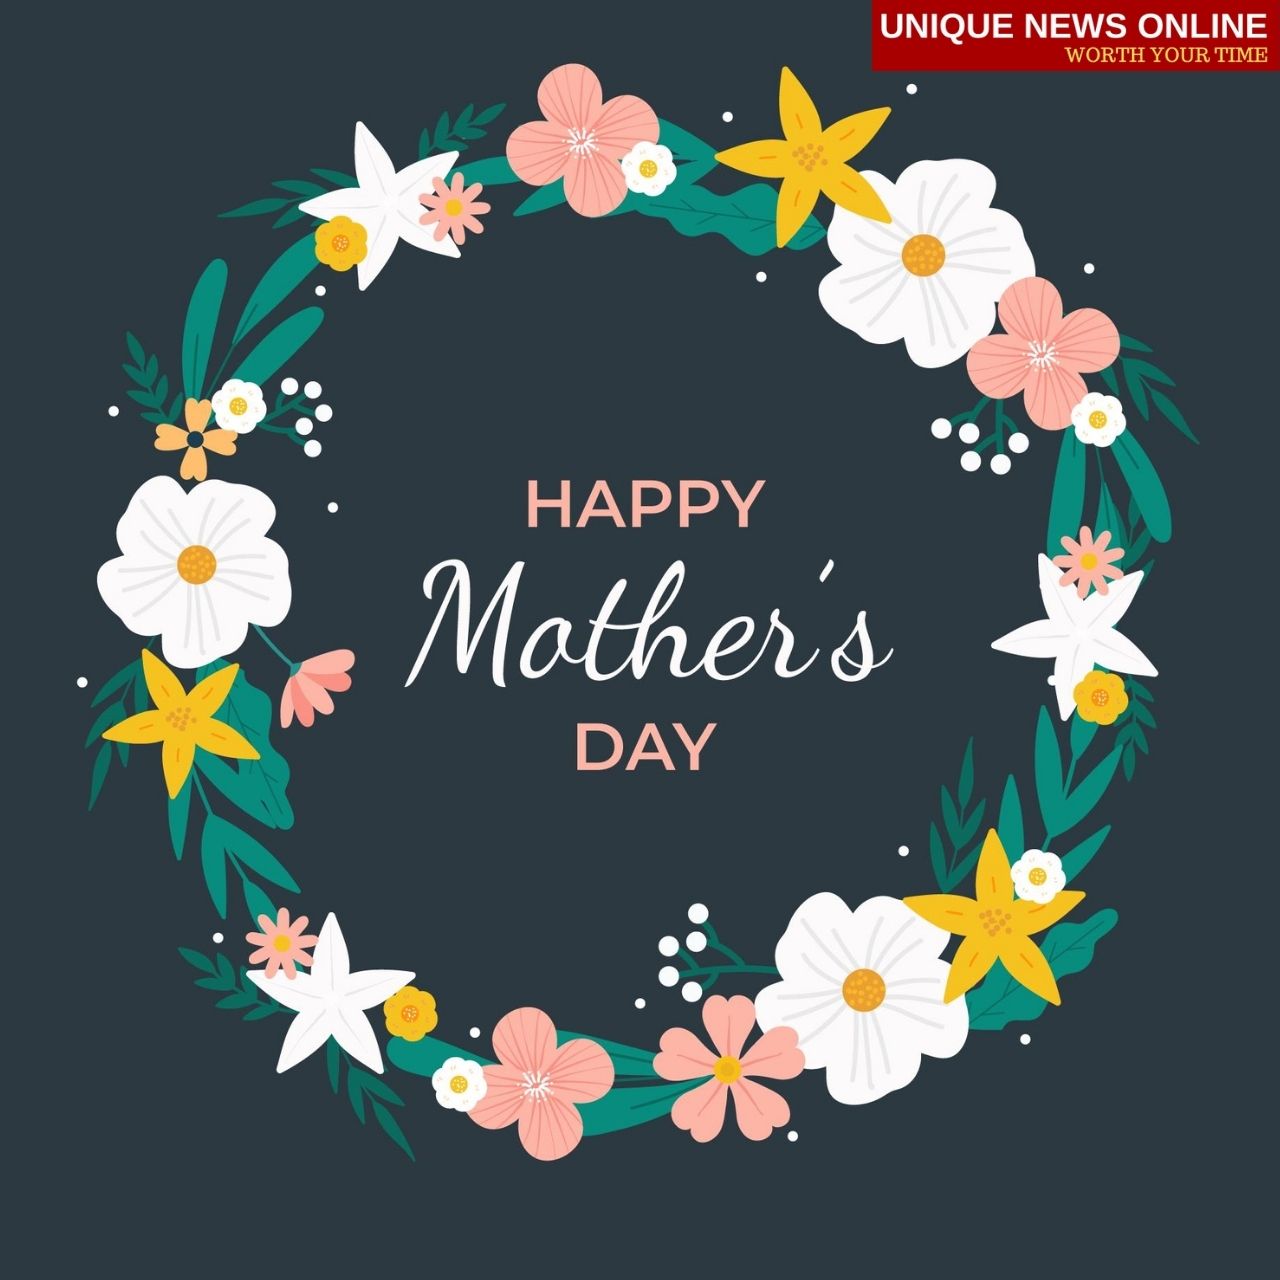 Mother's Day 2021 Images